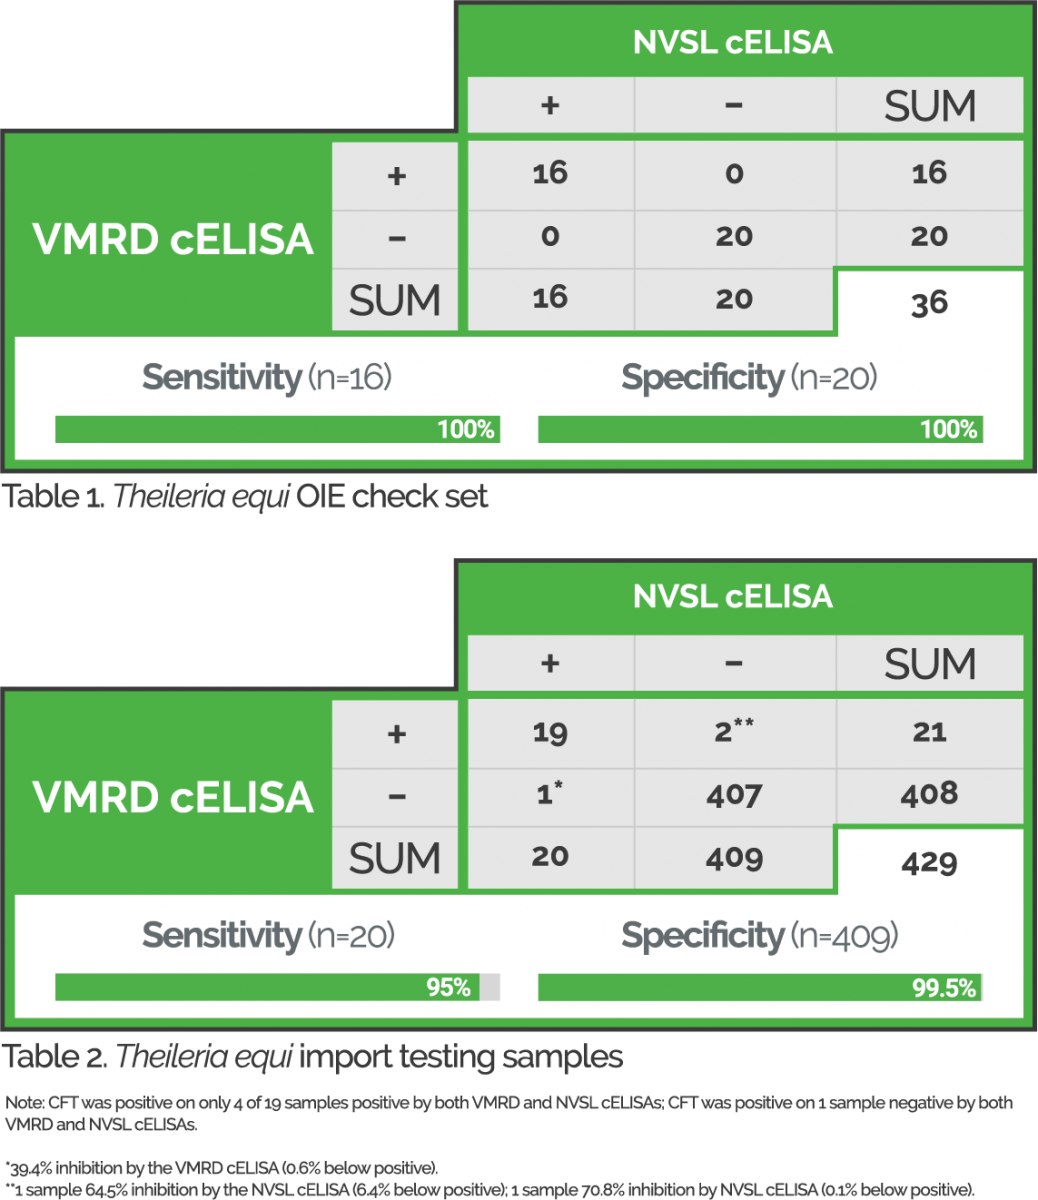 Table 1: OIE Check Set; VMRD's T equi antibody test kit has 100% sensitivity & specificity. Table 2: import testing samples; VMRD's T equi antibody test kit has a sensitivity of 95% and specificity of 99.5%. 